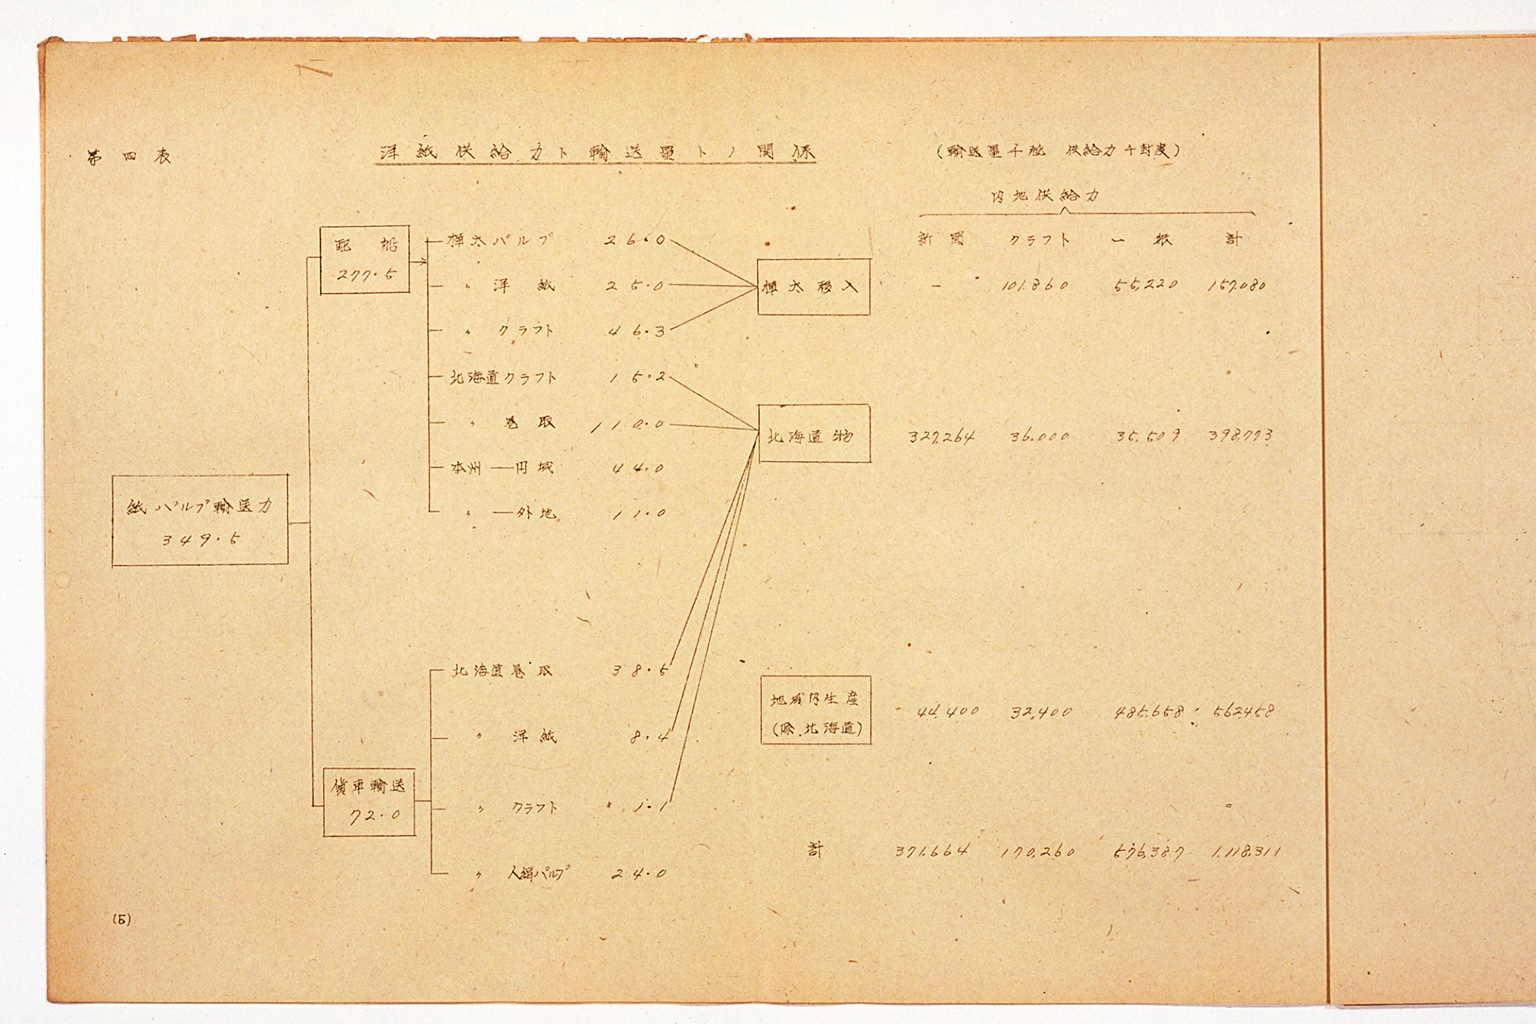 Revised Outline of Resource Mobilization Plan  for 1944 (Showa 19) (Appended to Supply Capacity Blueprint)(larger)